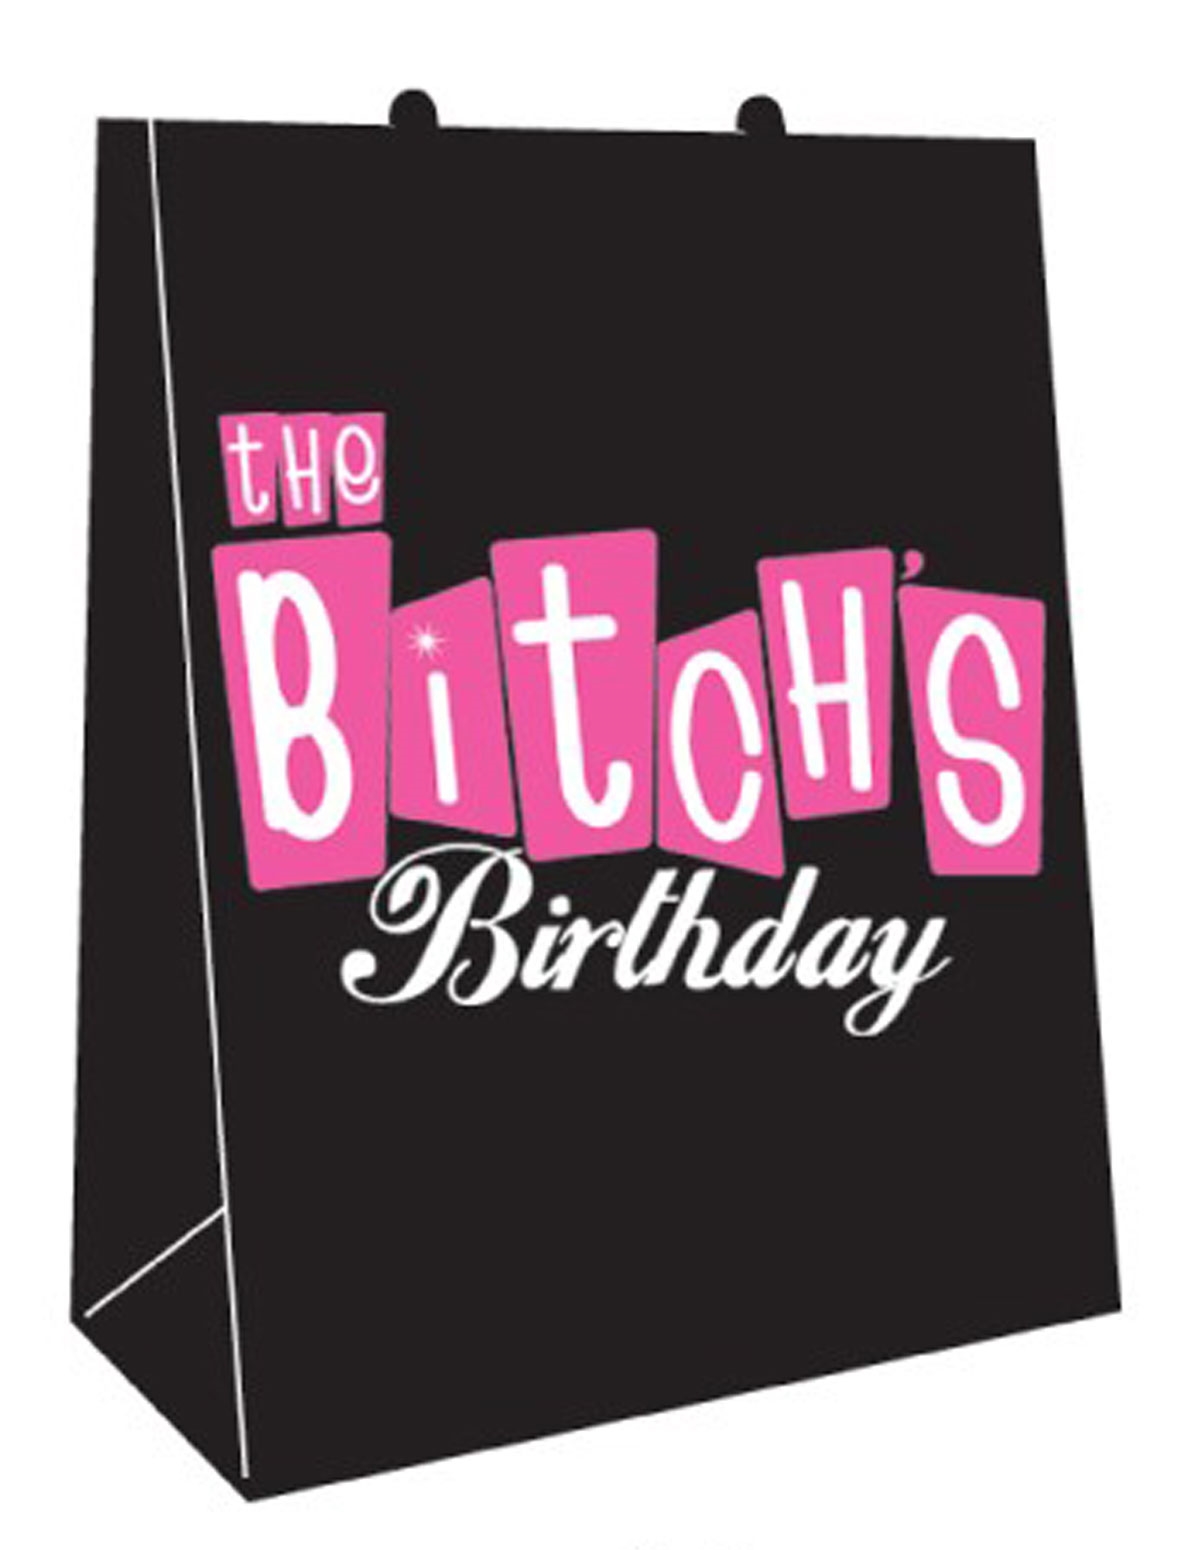 alternate image for The Bitchs Birthday Gift Bag